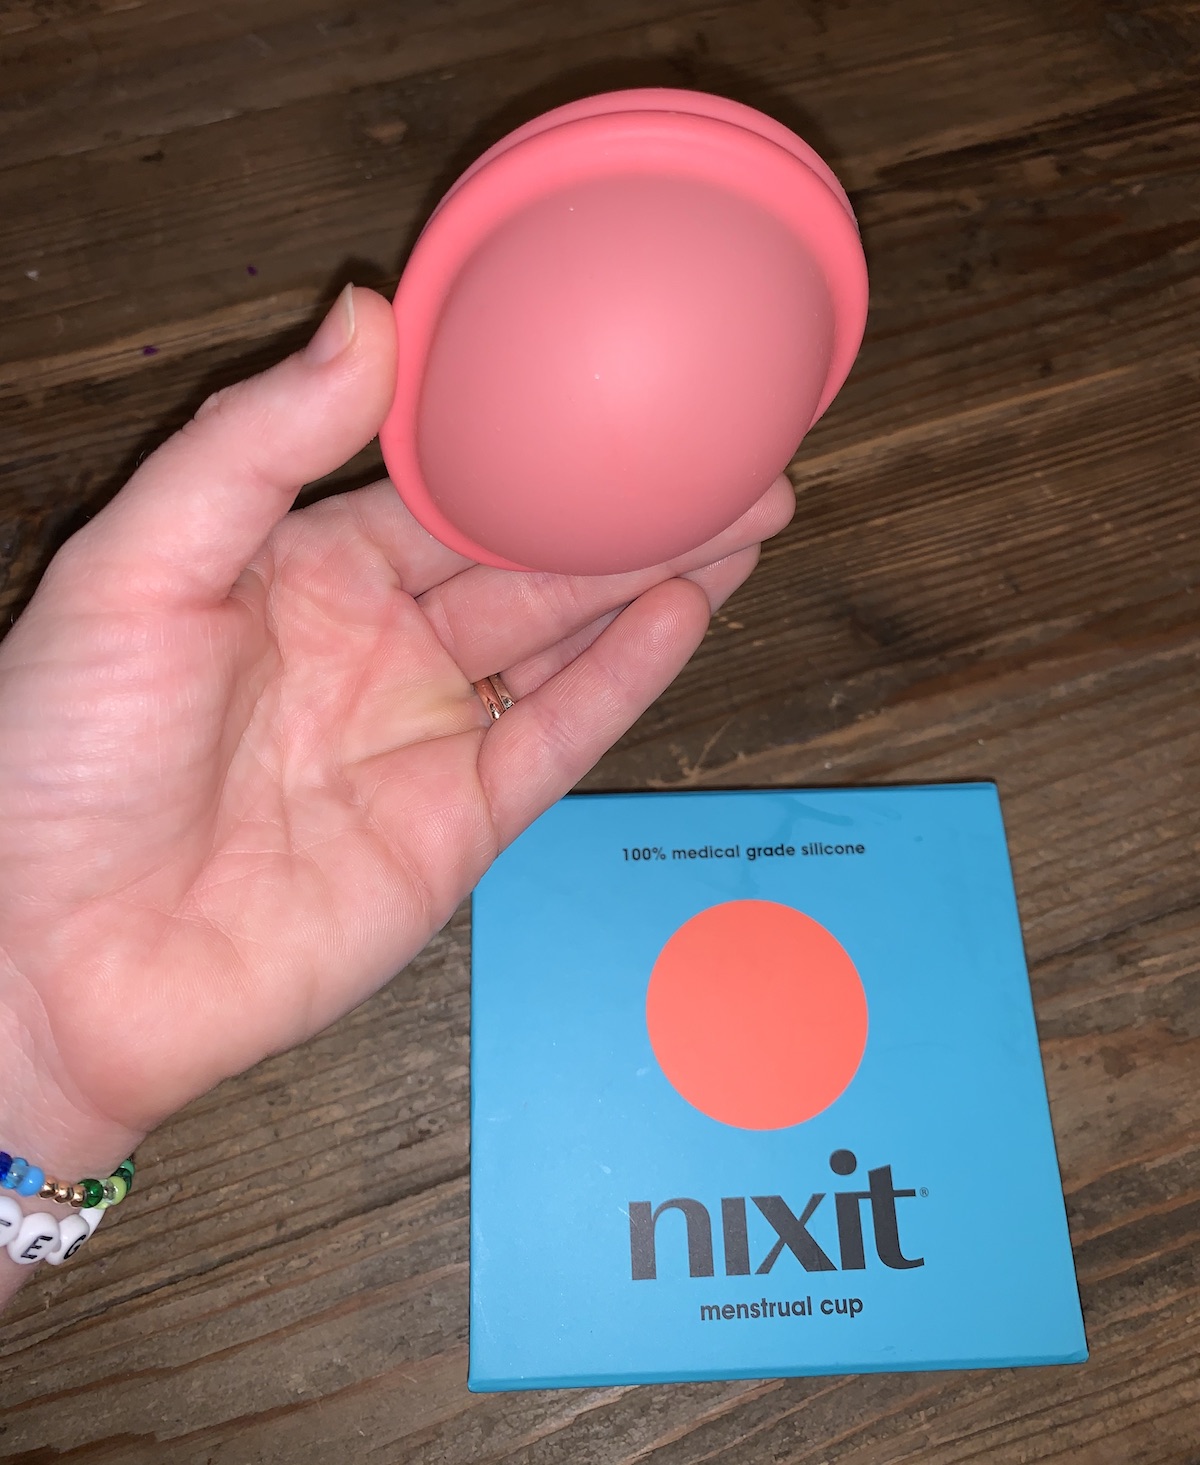 https://meandreegs.com/wp-content/uploads/2021/04/Nixit-Menstrual-Cup-Review.jpg